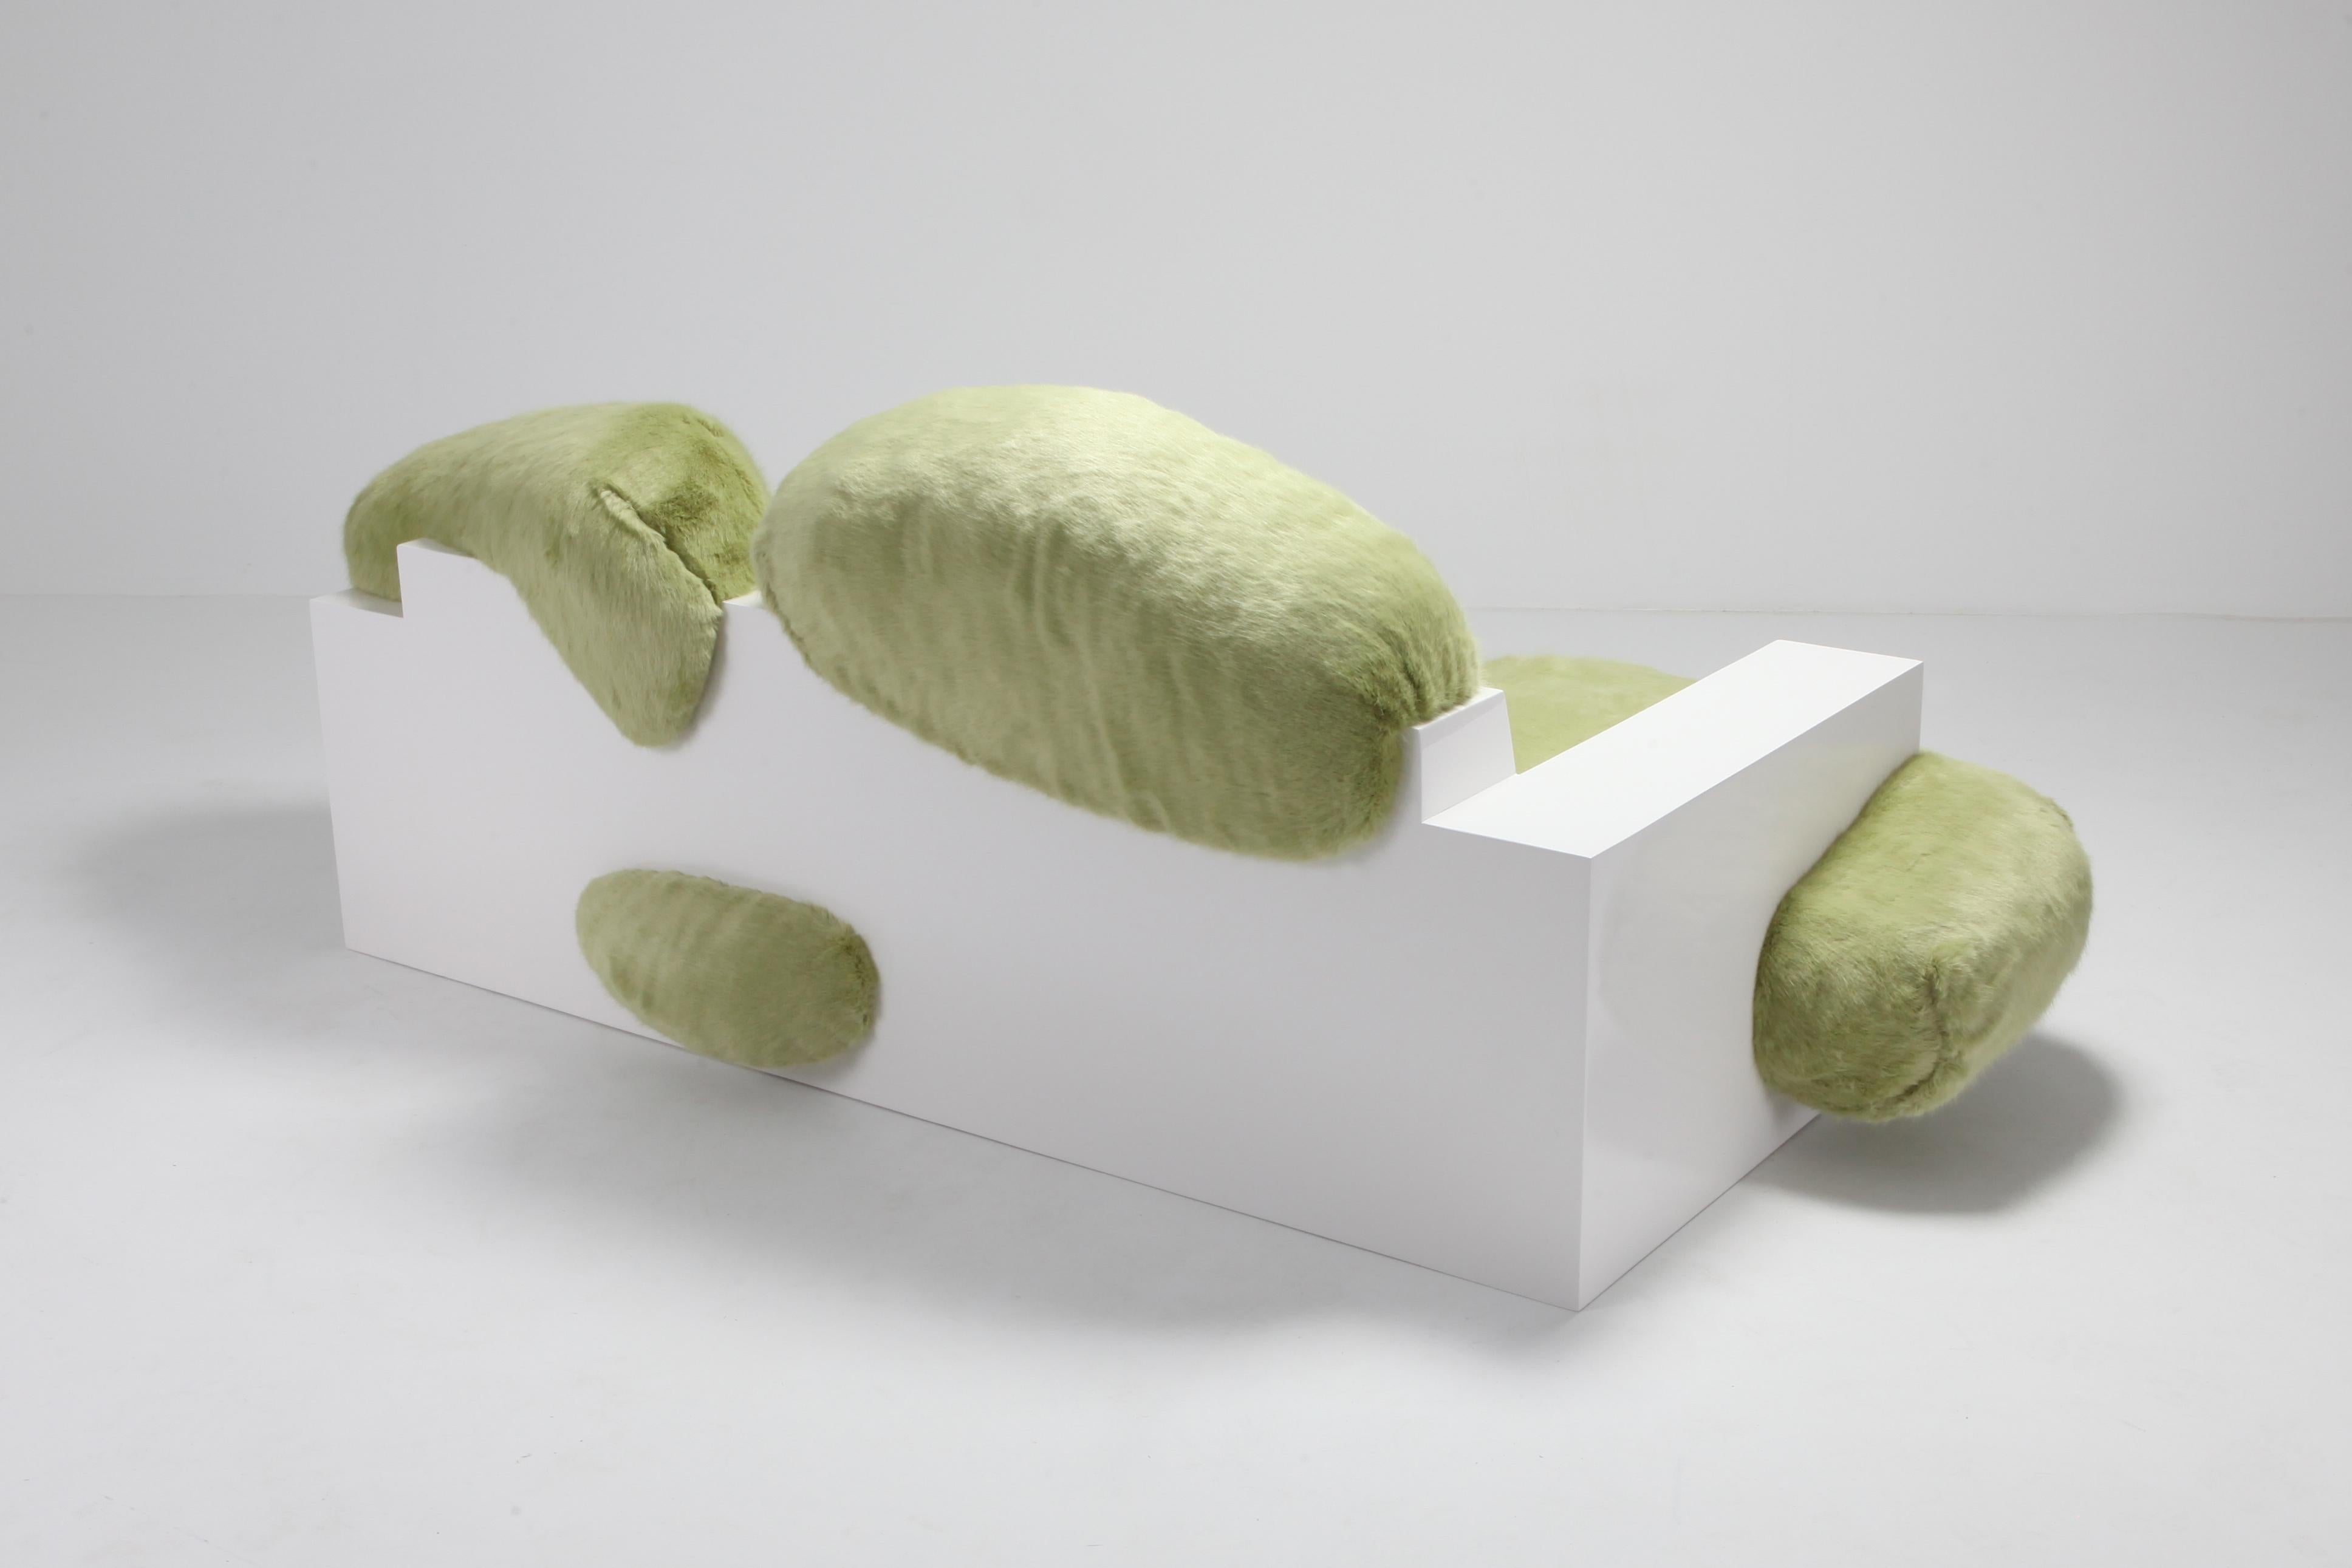 European Pillow Couch by Schimmel & Schweikle from the Pillow.pillow Collection